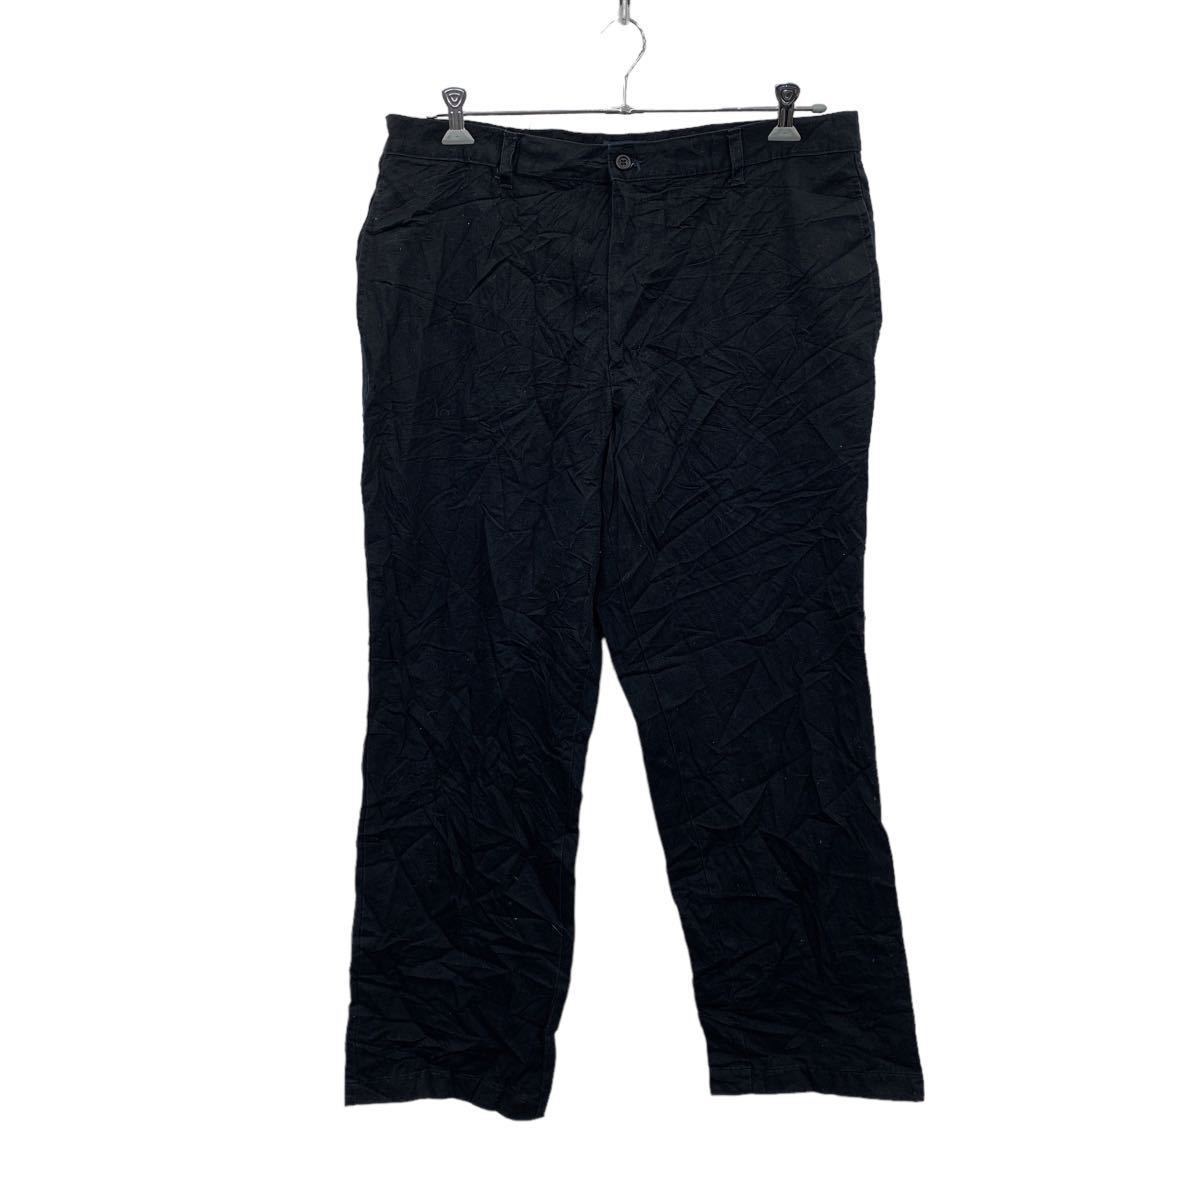 DOCKERS chino pants W38 Docker's black big size simple old clothes . America buying up 2305-1360